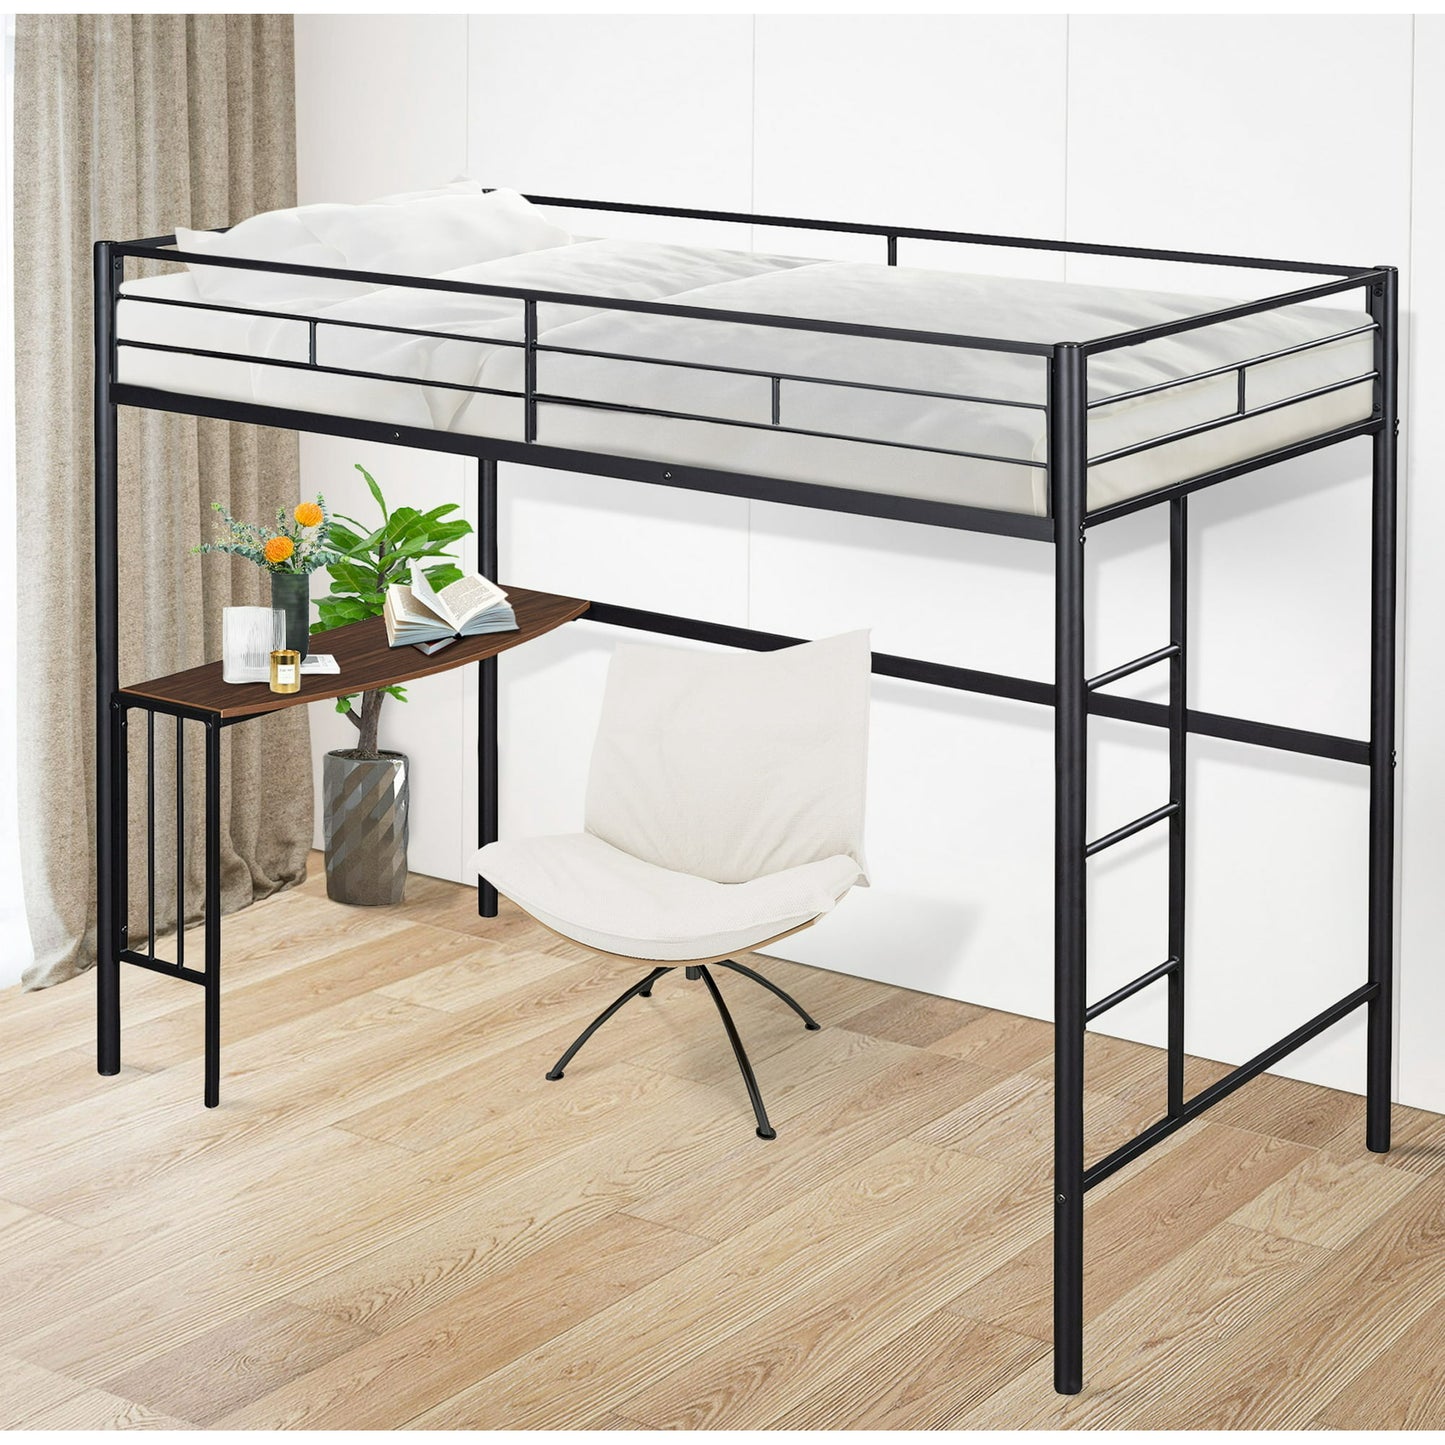 Twin Loft Bed Frame with Desk for Teens Kids, Classic Metal Bed Frames in Twin with Desk Ladder and Guardrails, Kids Bed Frame, Black, LJ504